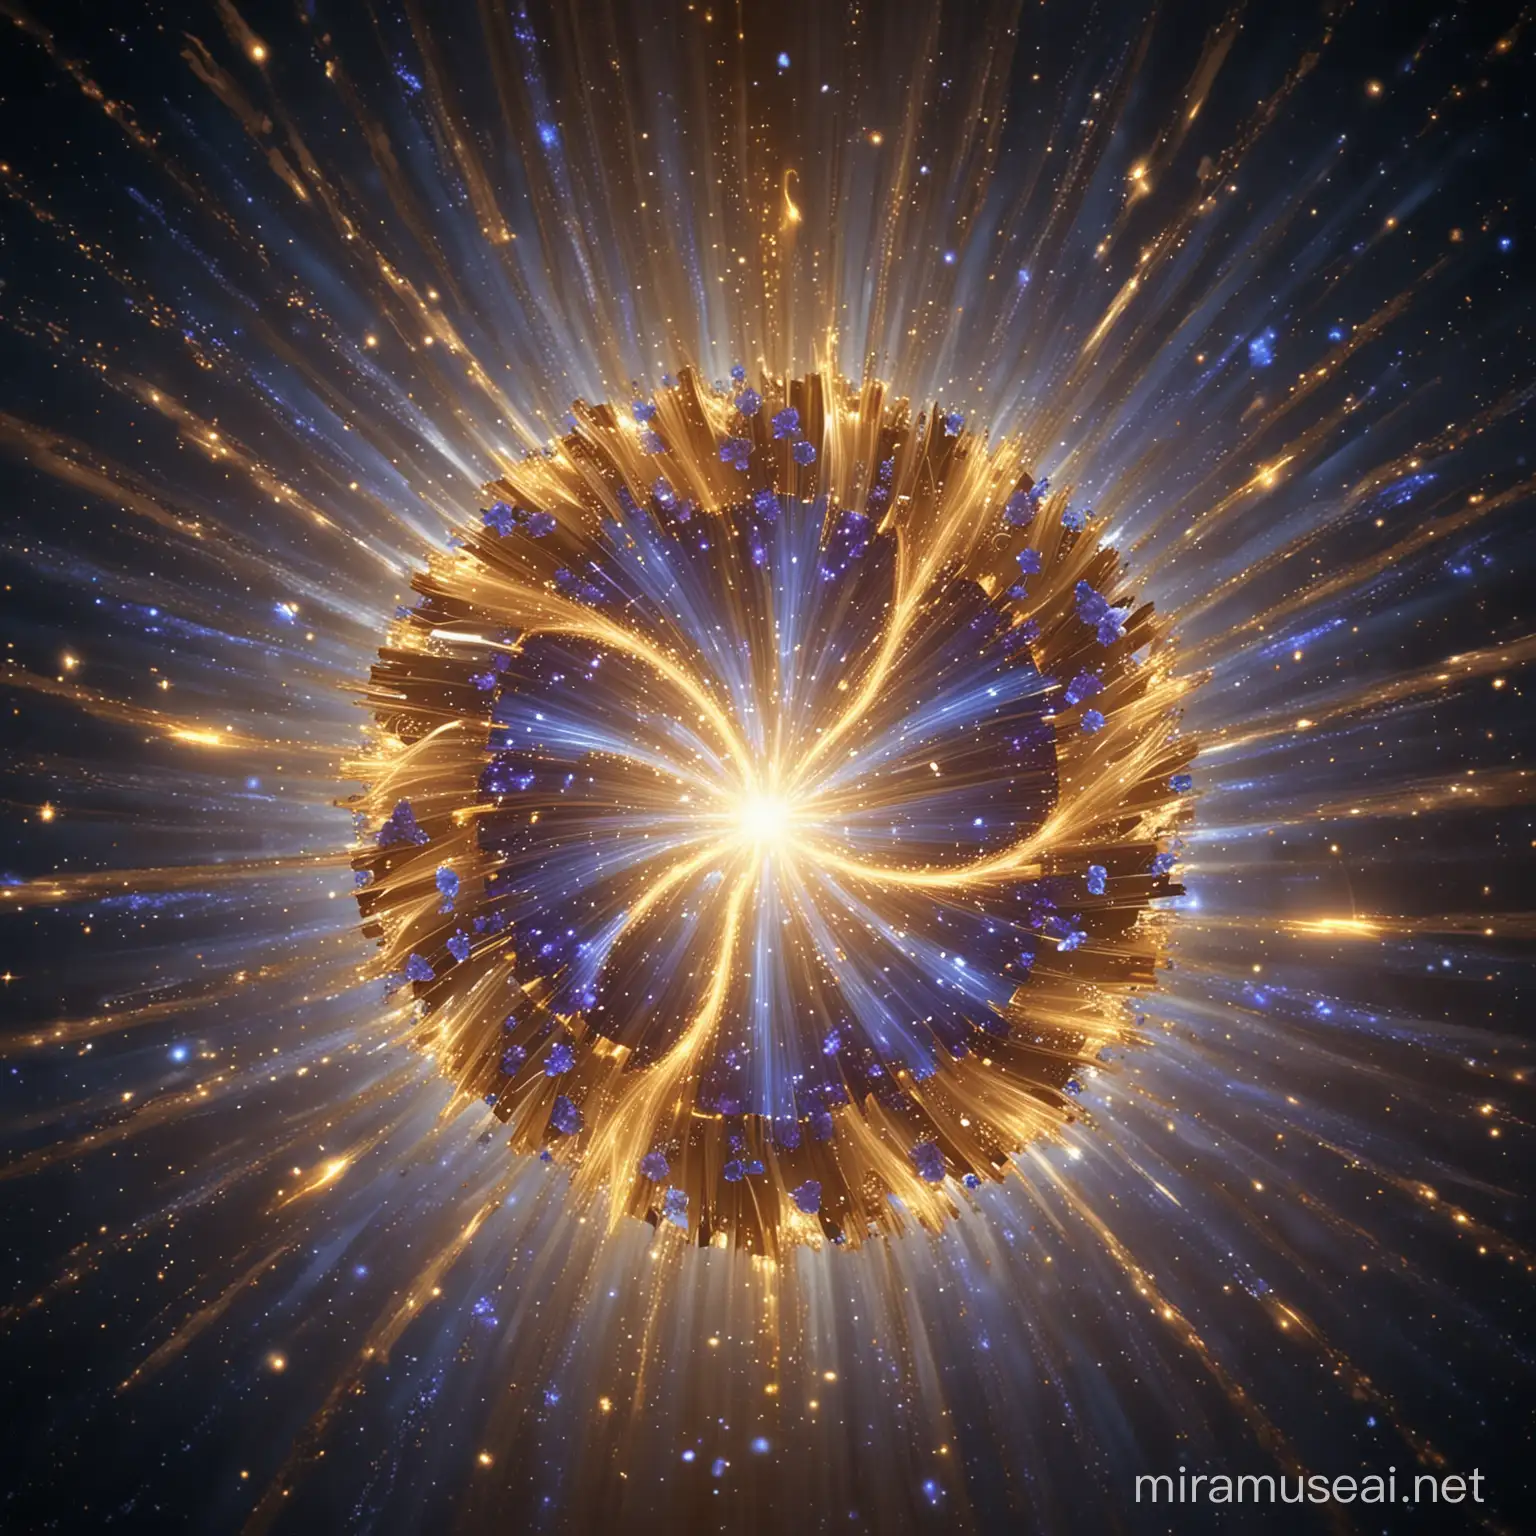 Vibrant Spiral Burst Dynamic 3D Explosion of Lights and Colors